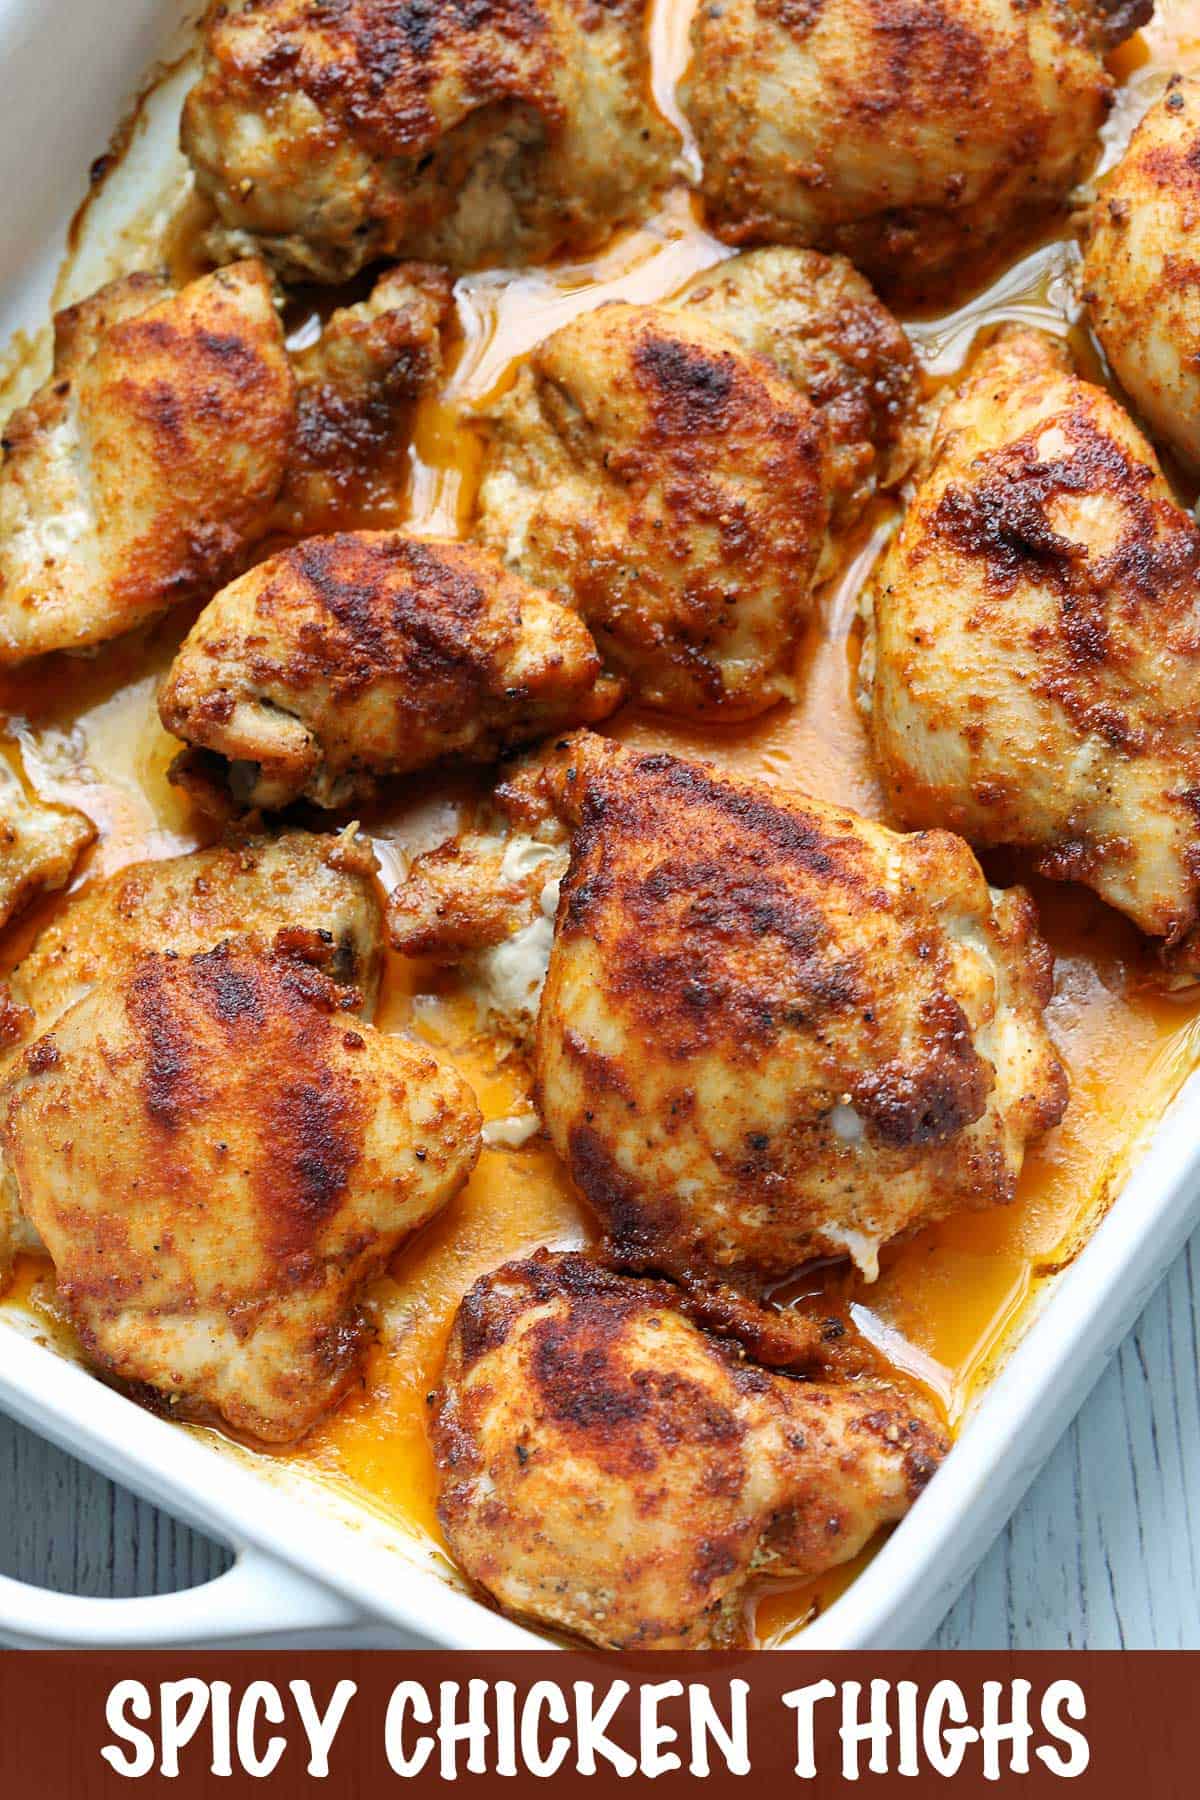 Baked boneless skinless chicken thighs in a baking dish